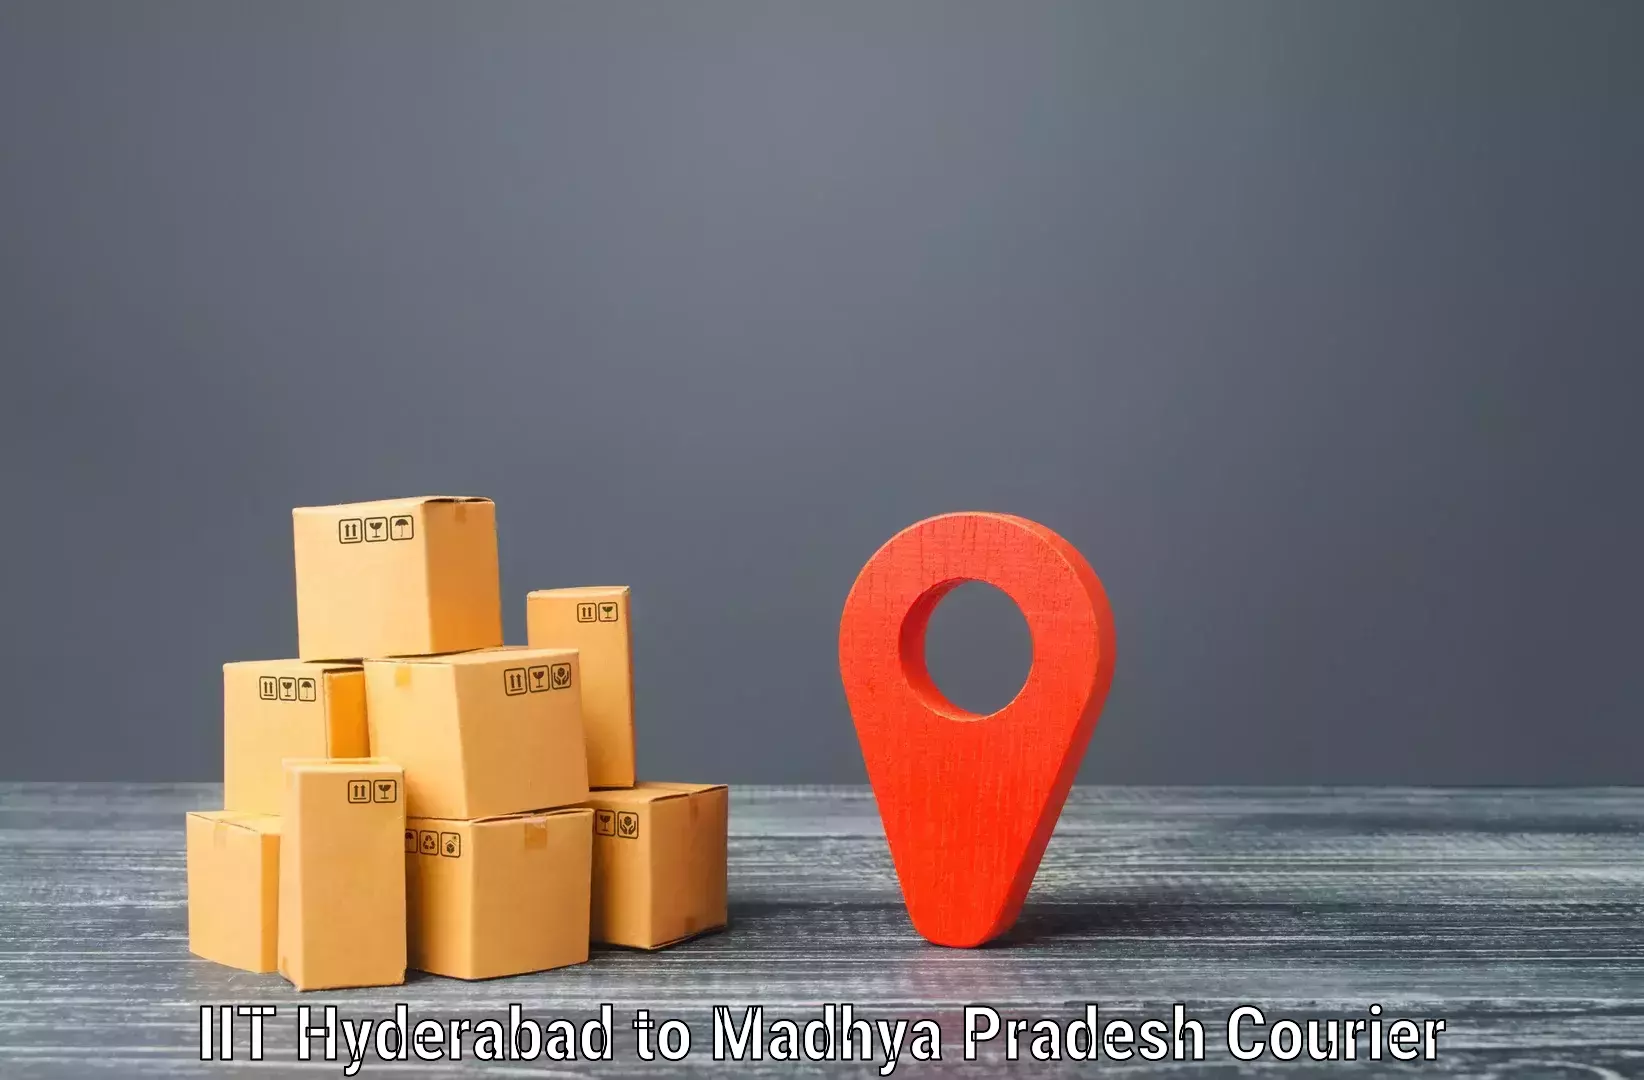 Reliable parcel services IIT Hyderabad to Ratlam